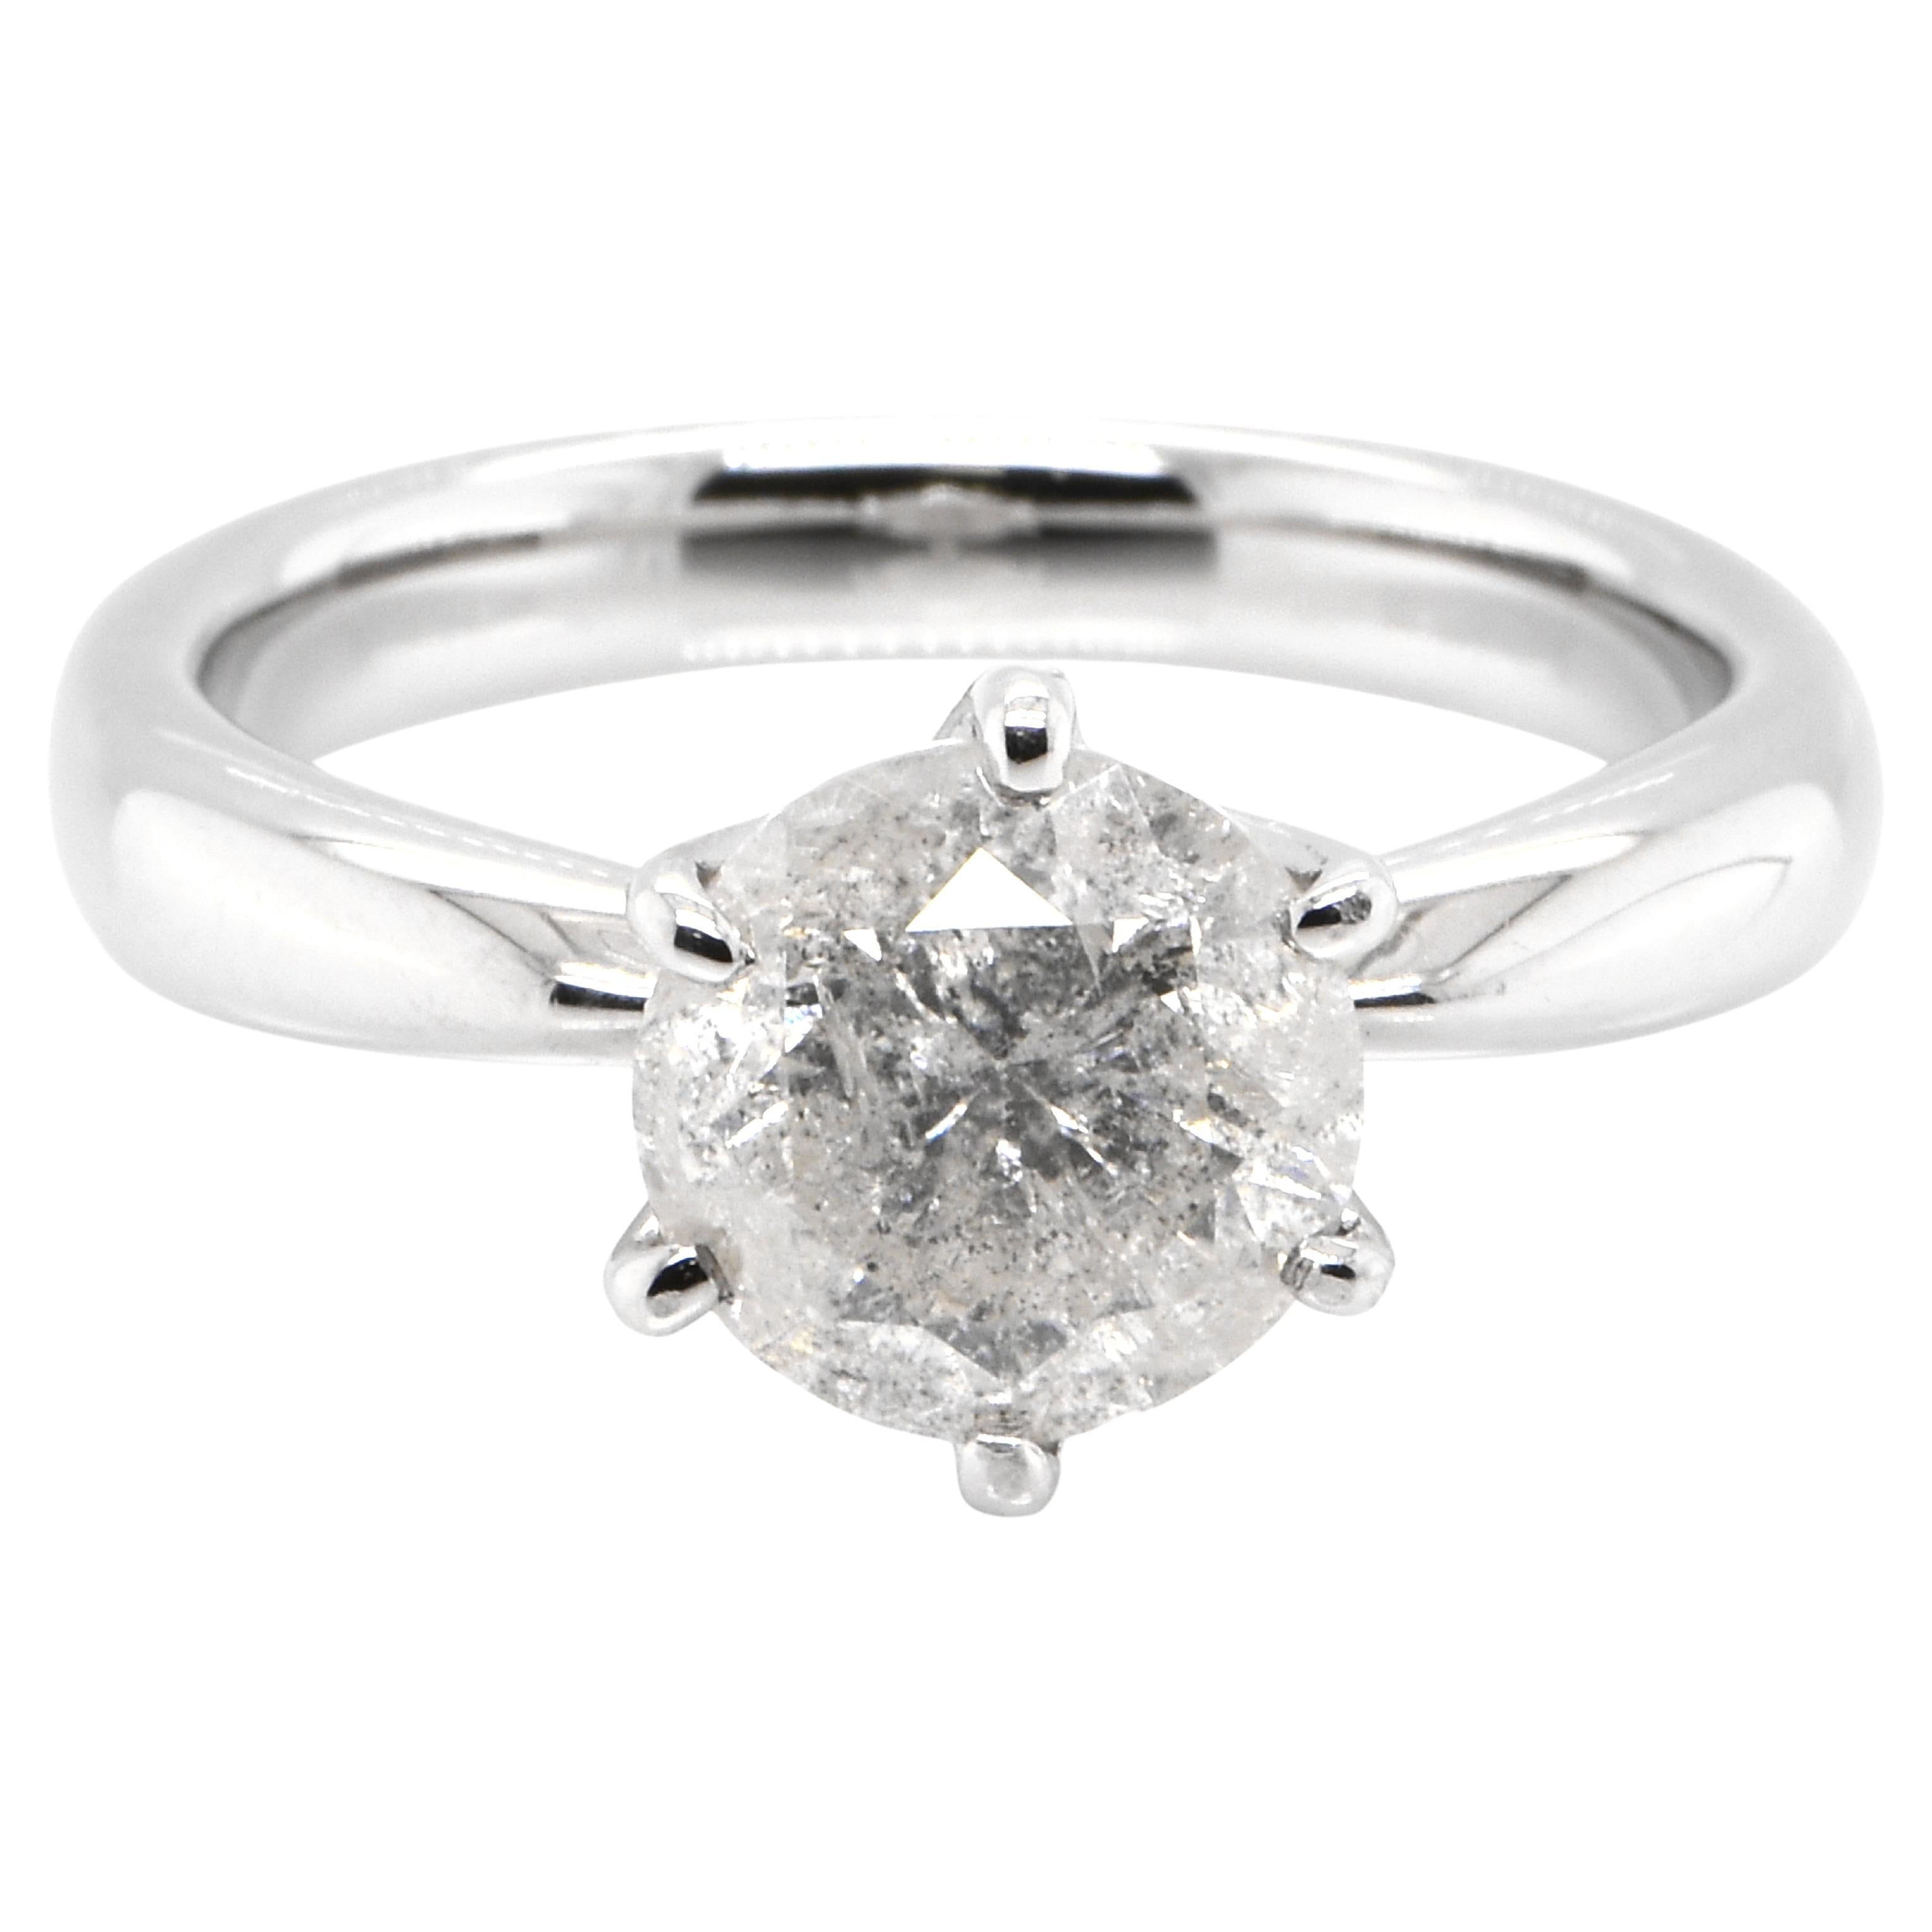 2.14 Carat Natural "Salt and Pepper" Diamond Solitaire Ring Made in Platinum For Sale